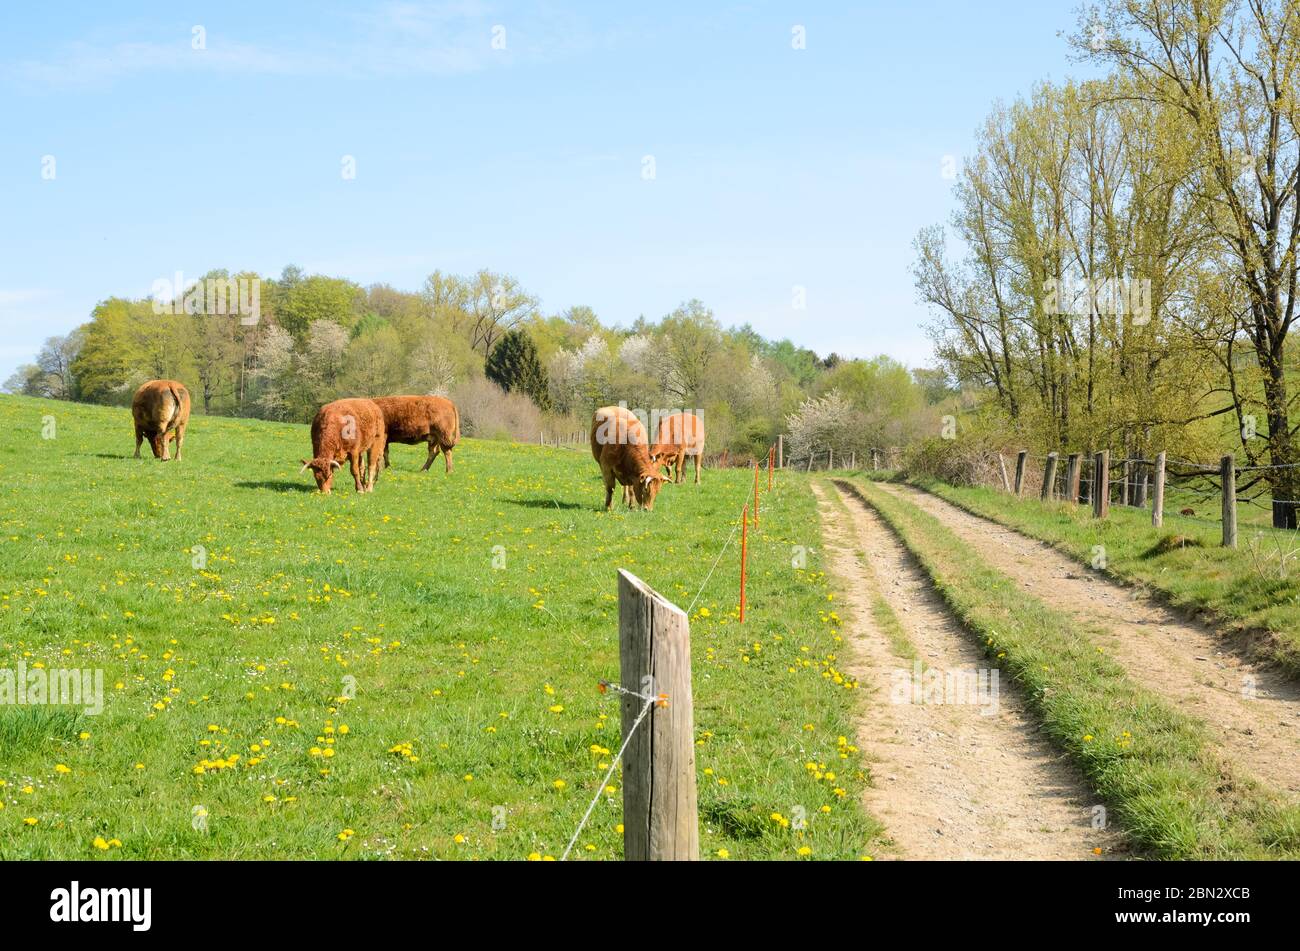 Bos Taurus, domestic limousin cattle livestock on a pasture in the countryside in Rhineland-Palatinate, Germany, Western Europe Stock Photo